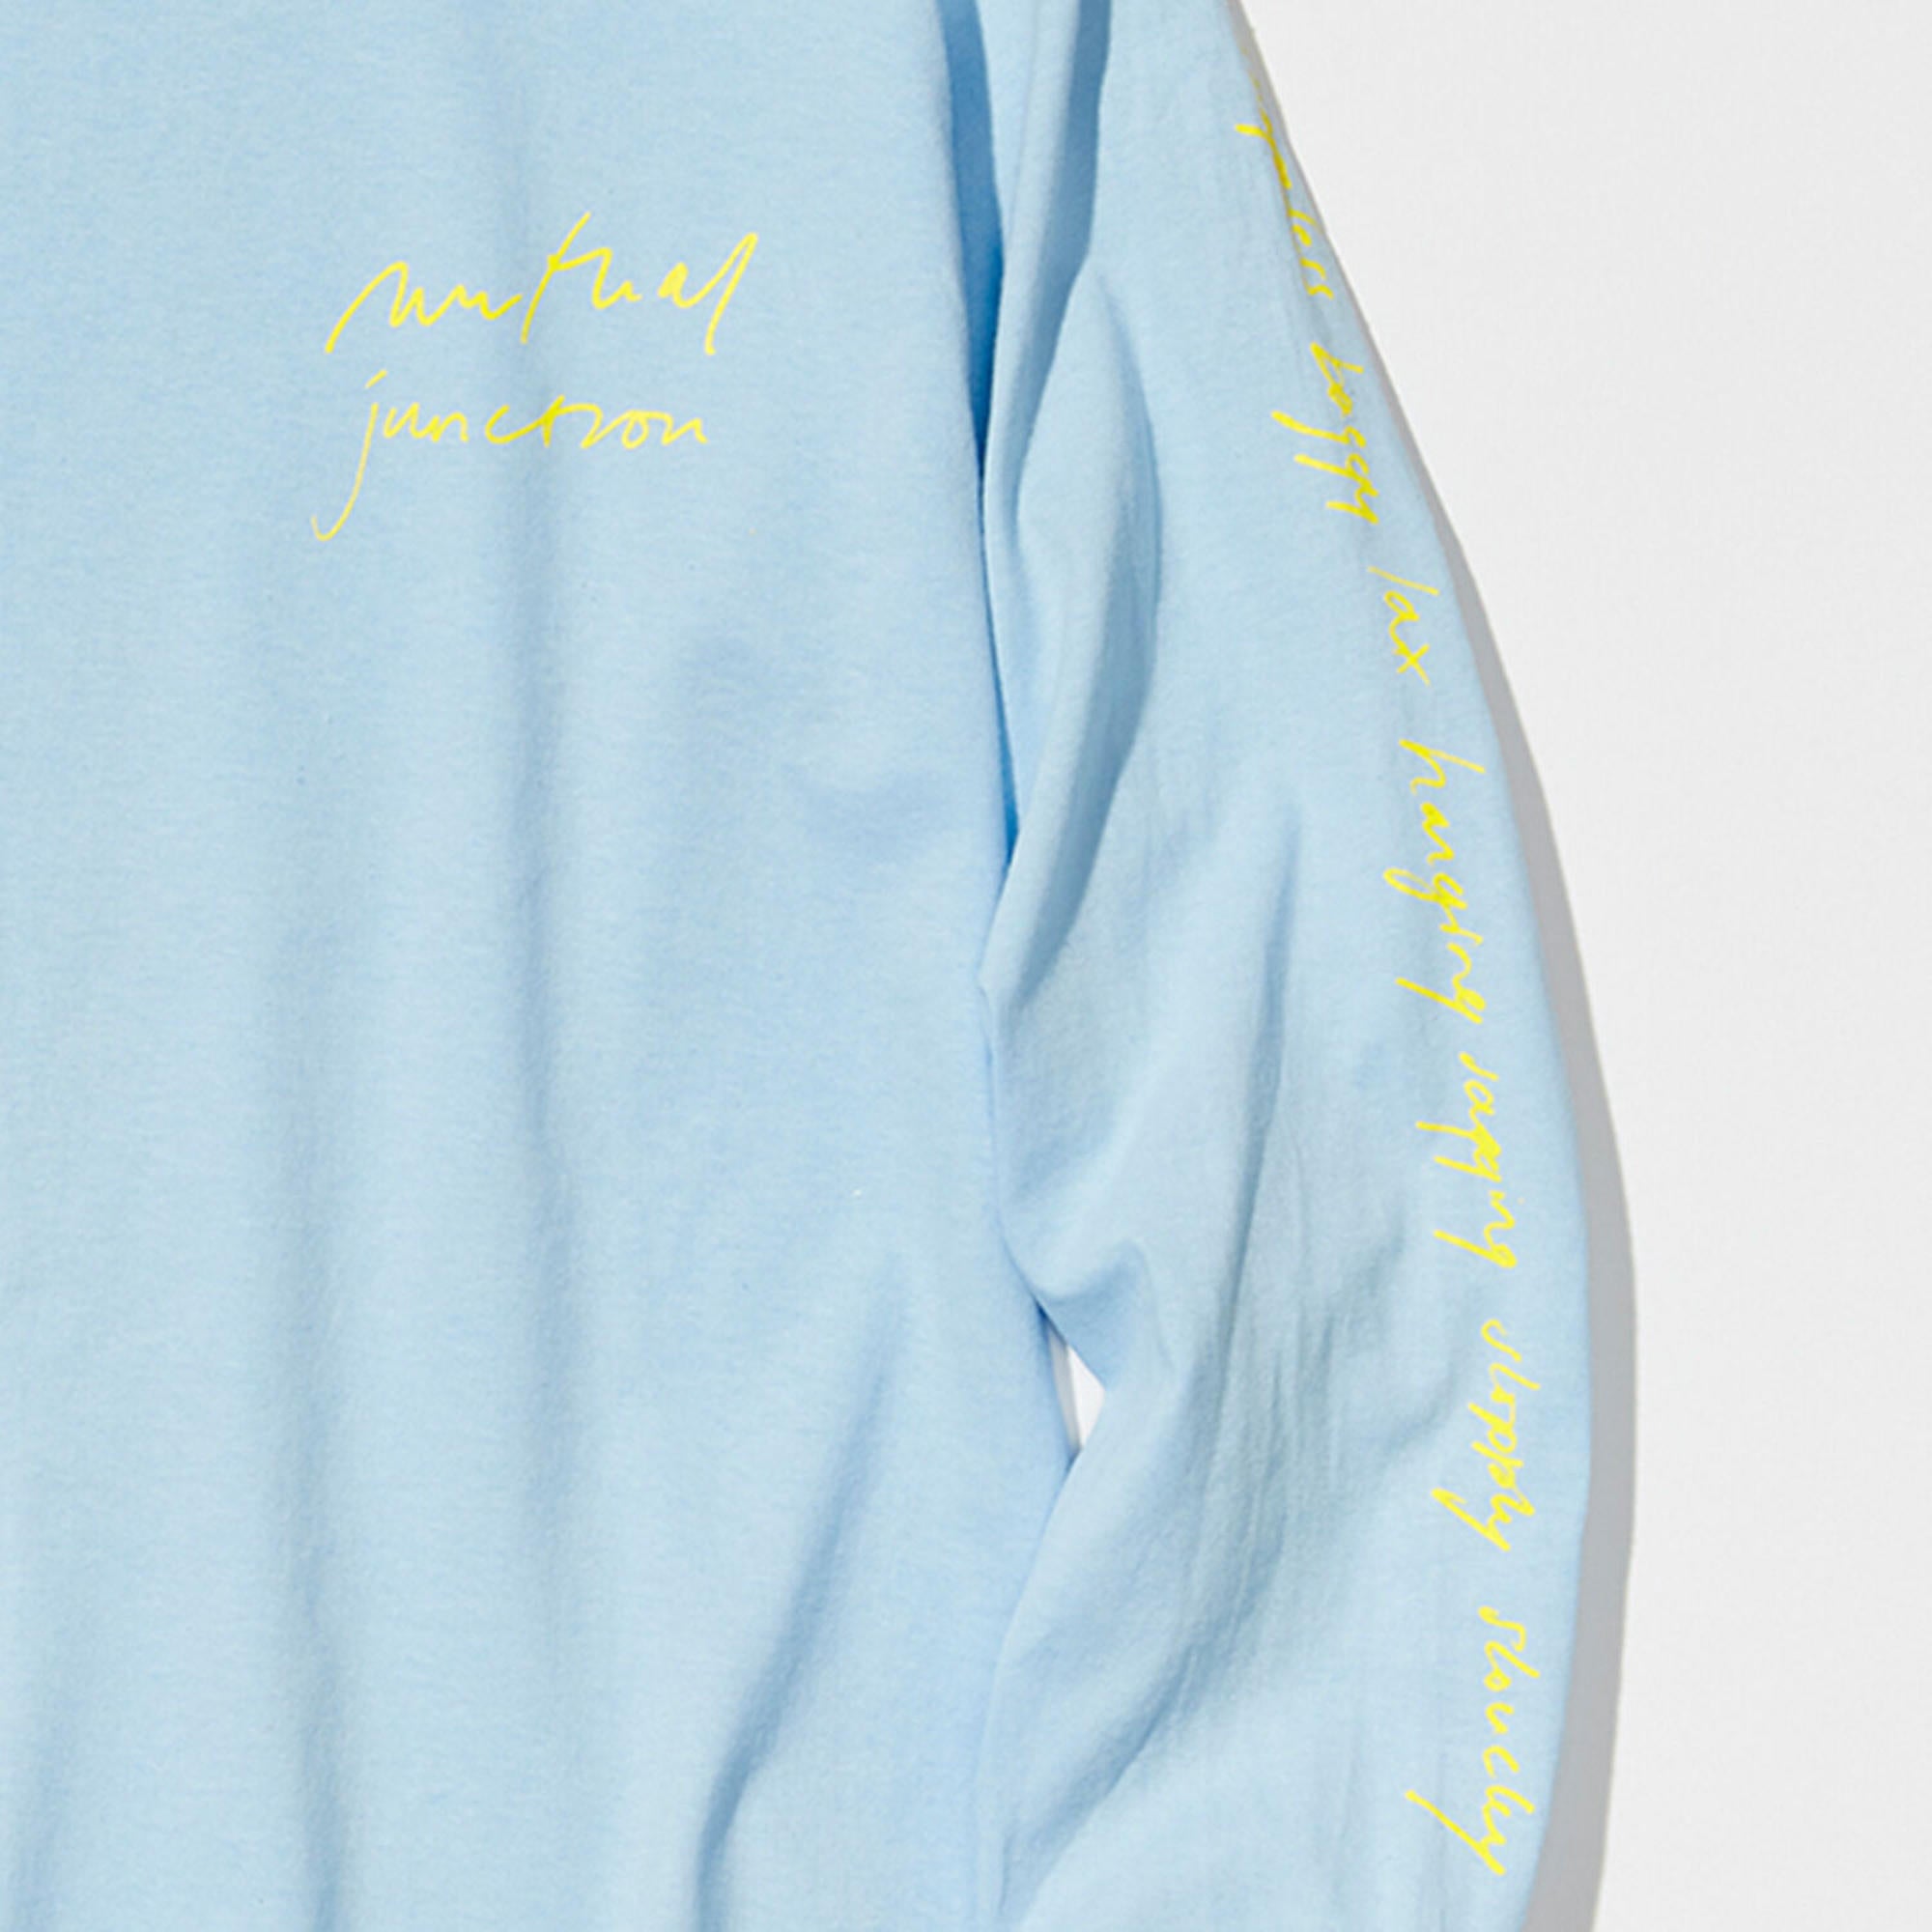 RUPERT SMYTH - 'MUTUAL JUNCTION' L/S TEE